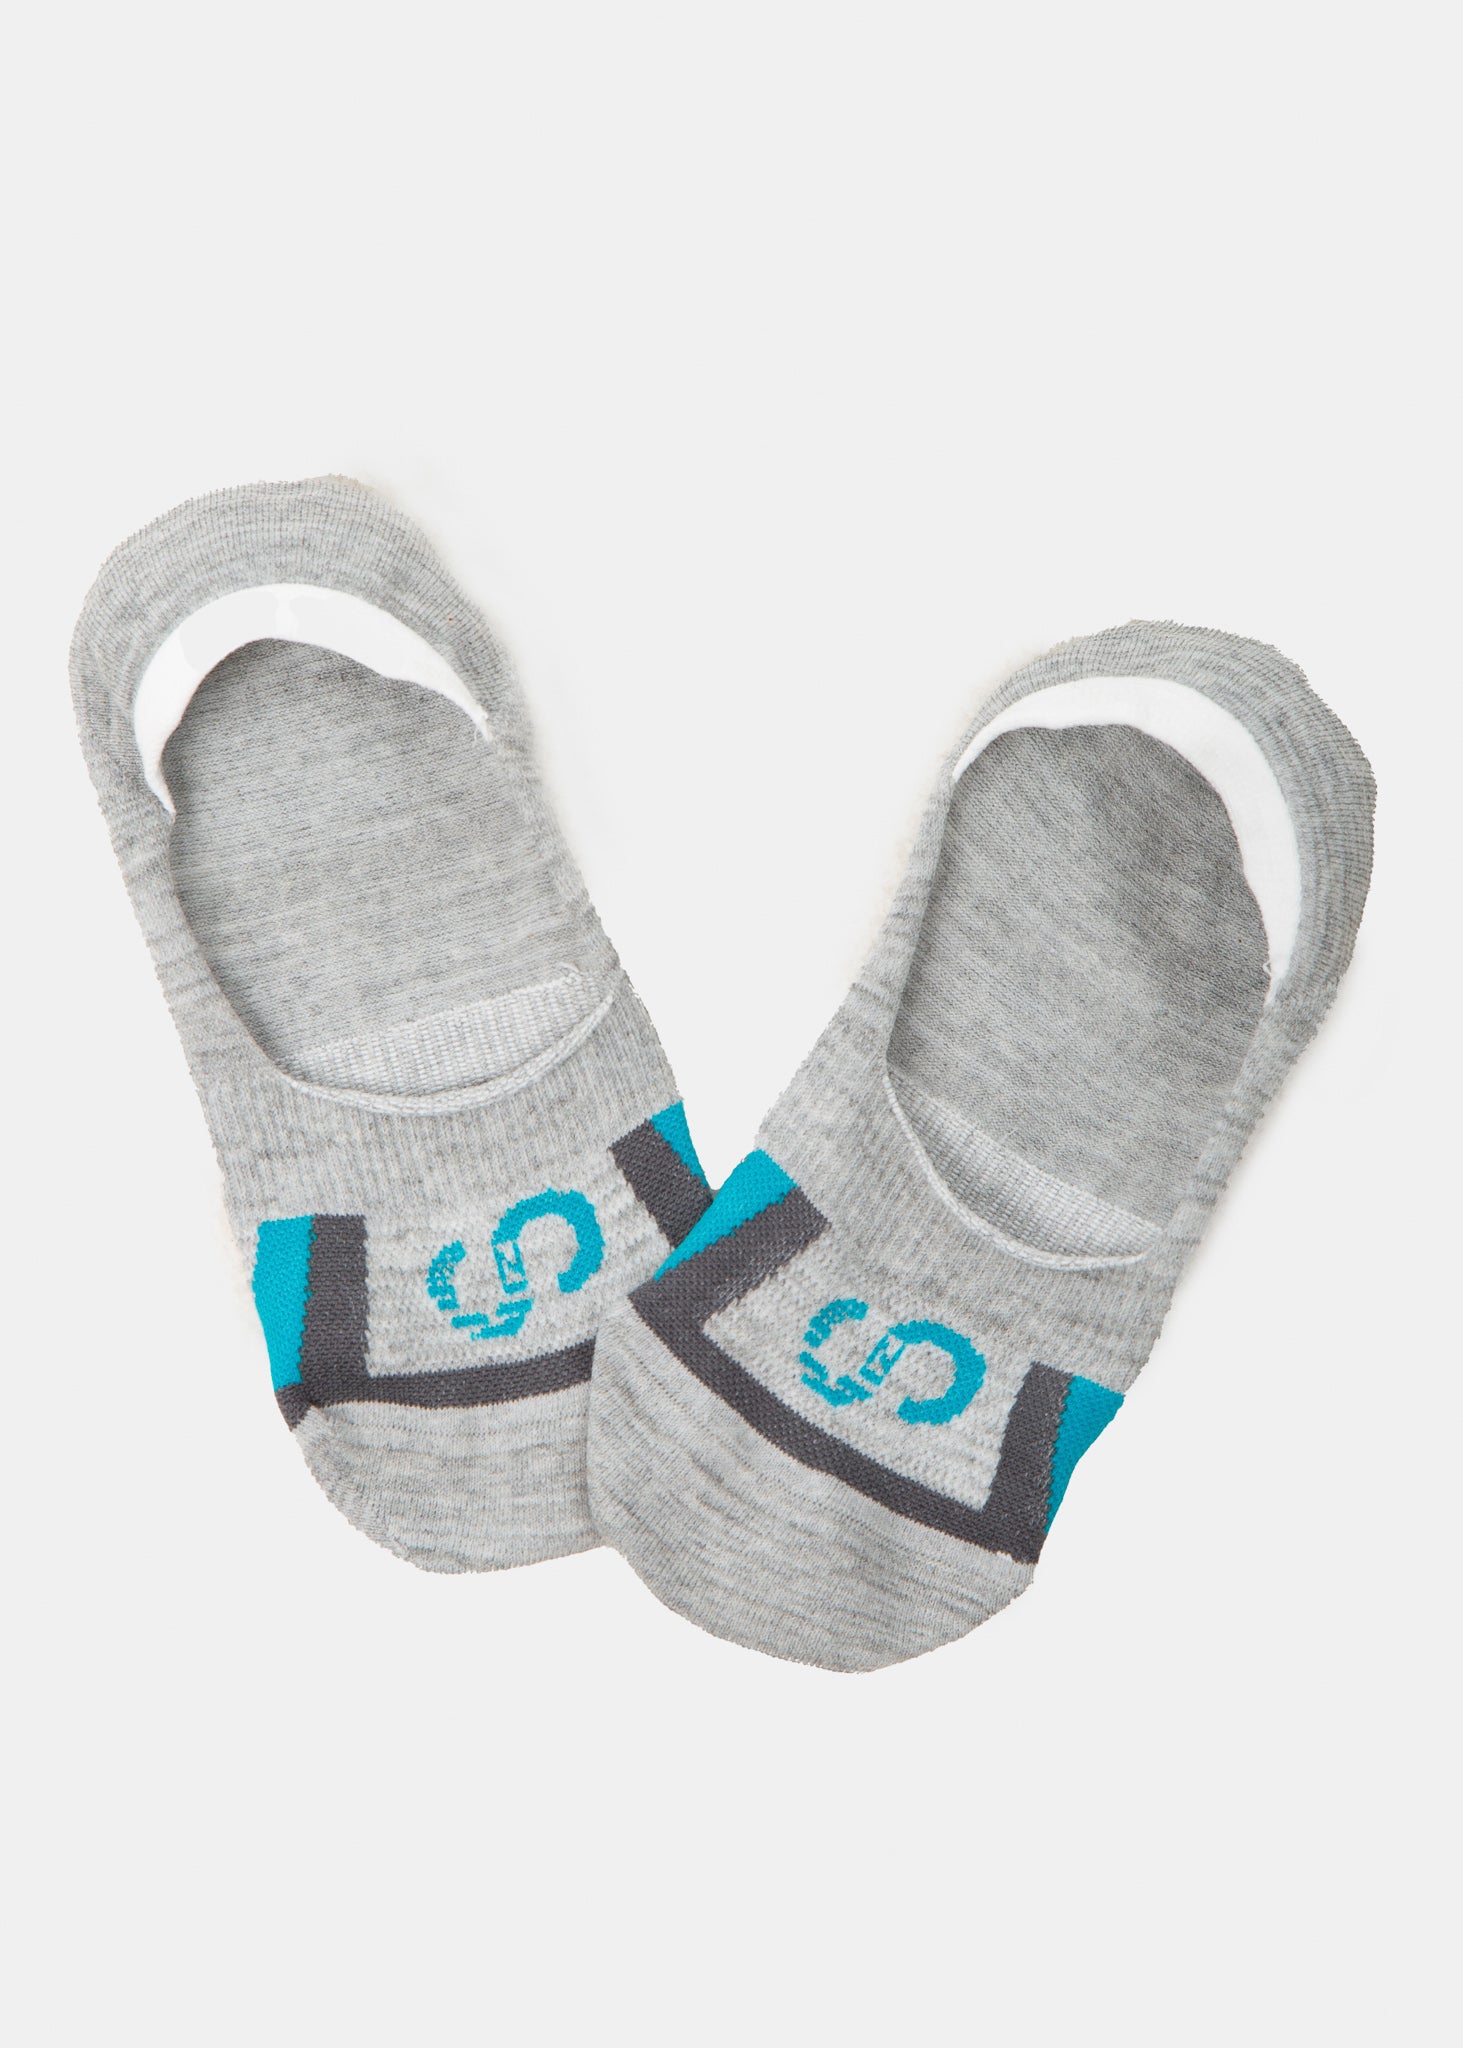 No-Show Socks | Two Pairs: Gray and White